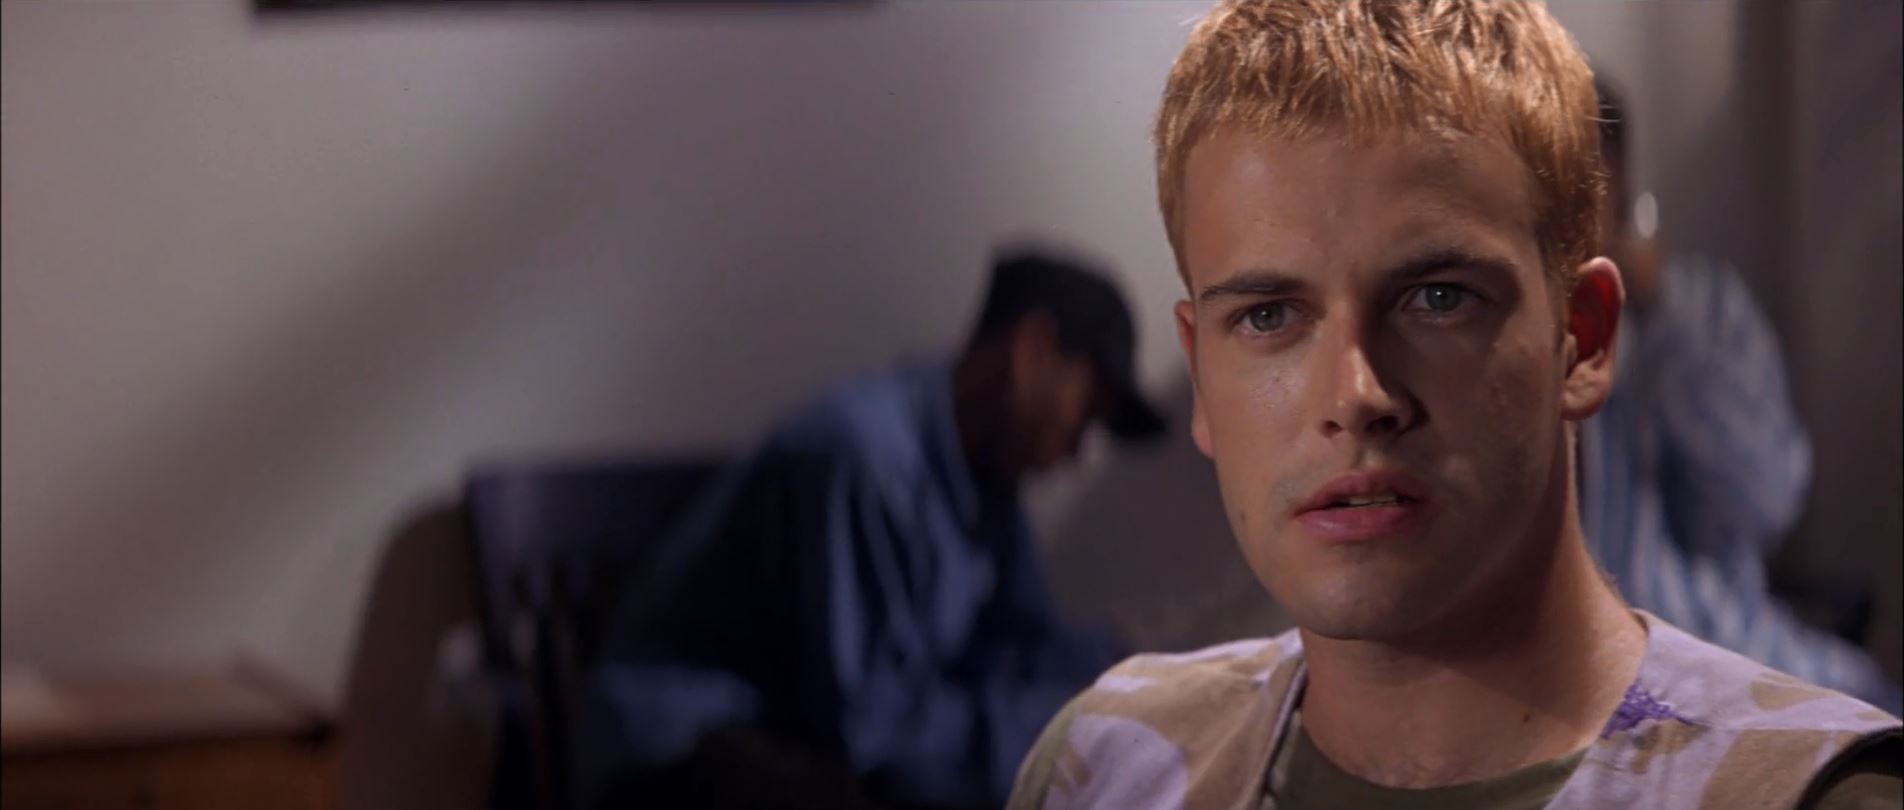 Jonny Lee Miller as Dade Murphy - Crash Override Hackers 20th Anniversary Edition Blu-Ray Review